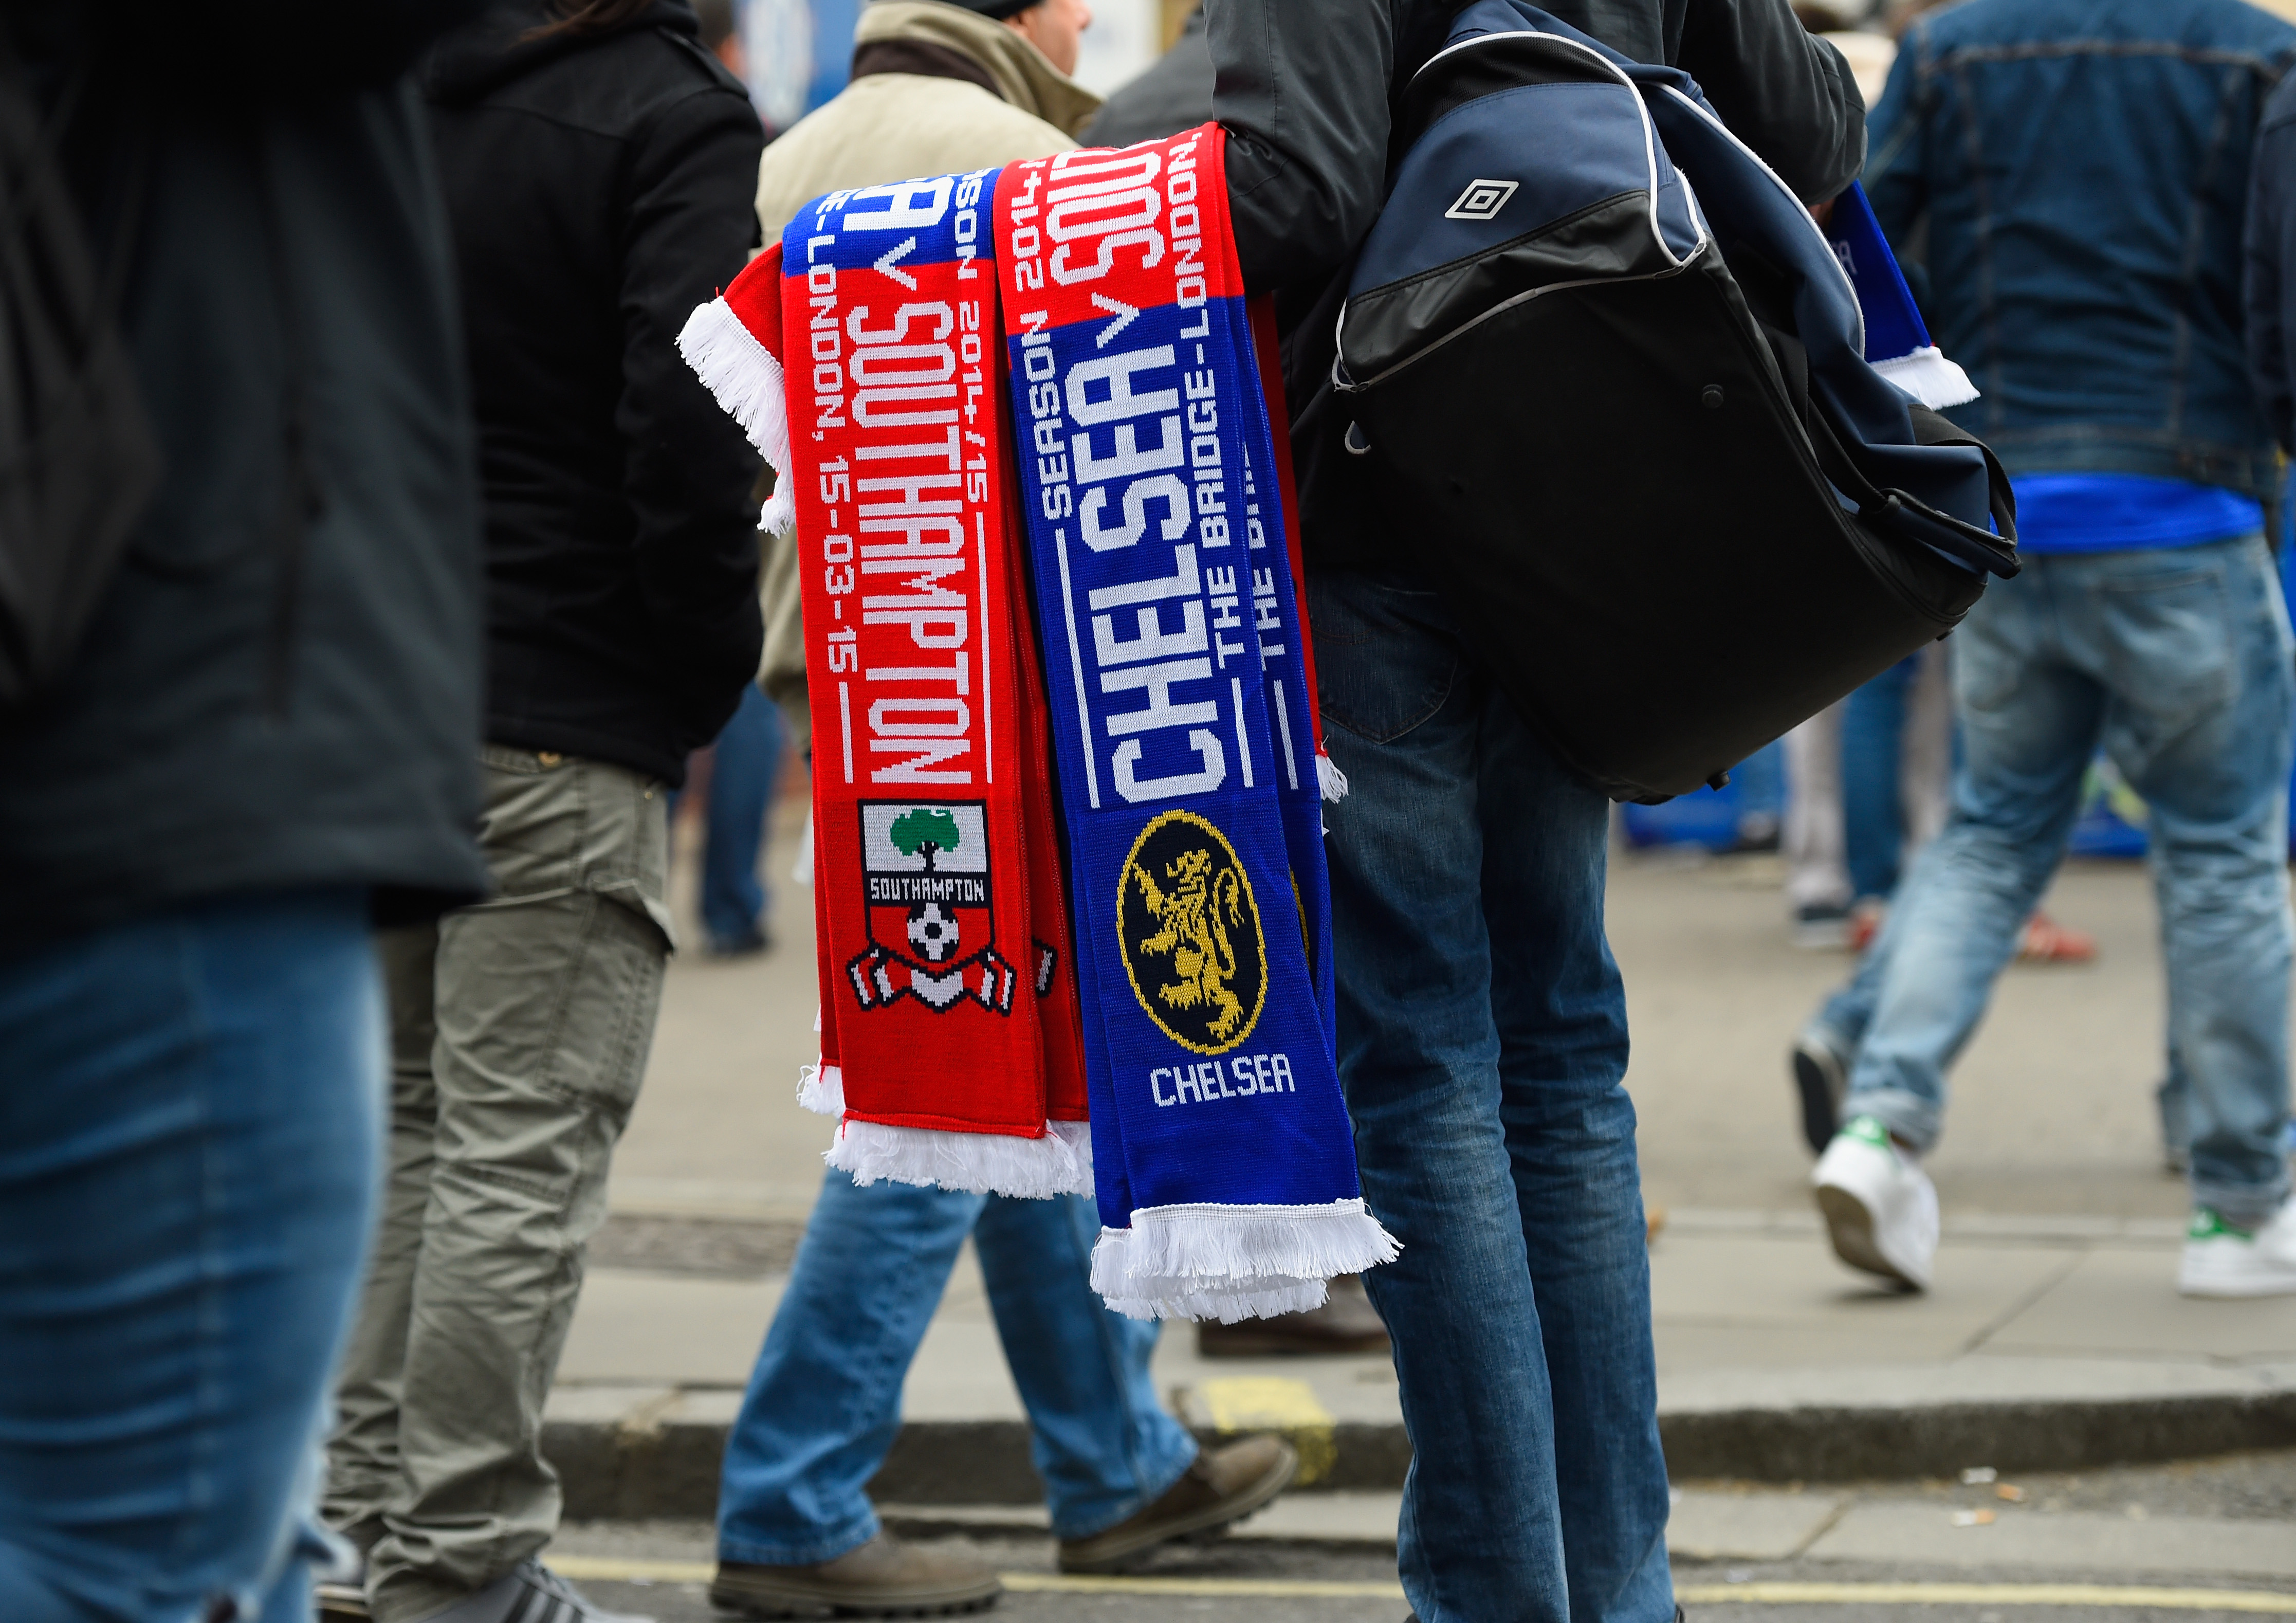 LONDON, ENGLAND - MARCH 15:  Matchday scarves are sold prior to the Barclays Premier League match between Chelsea and Southampton at Stamford Bridge on March 15, 2015 in London, England.  (Photo by Mike Hewitt/Getty Images)